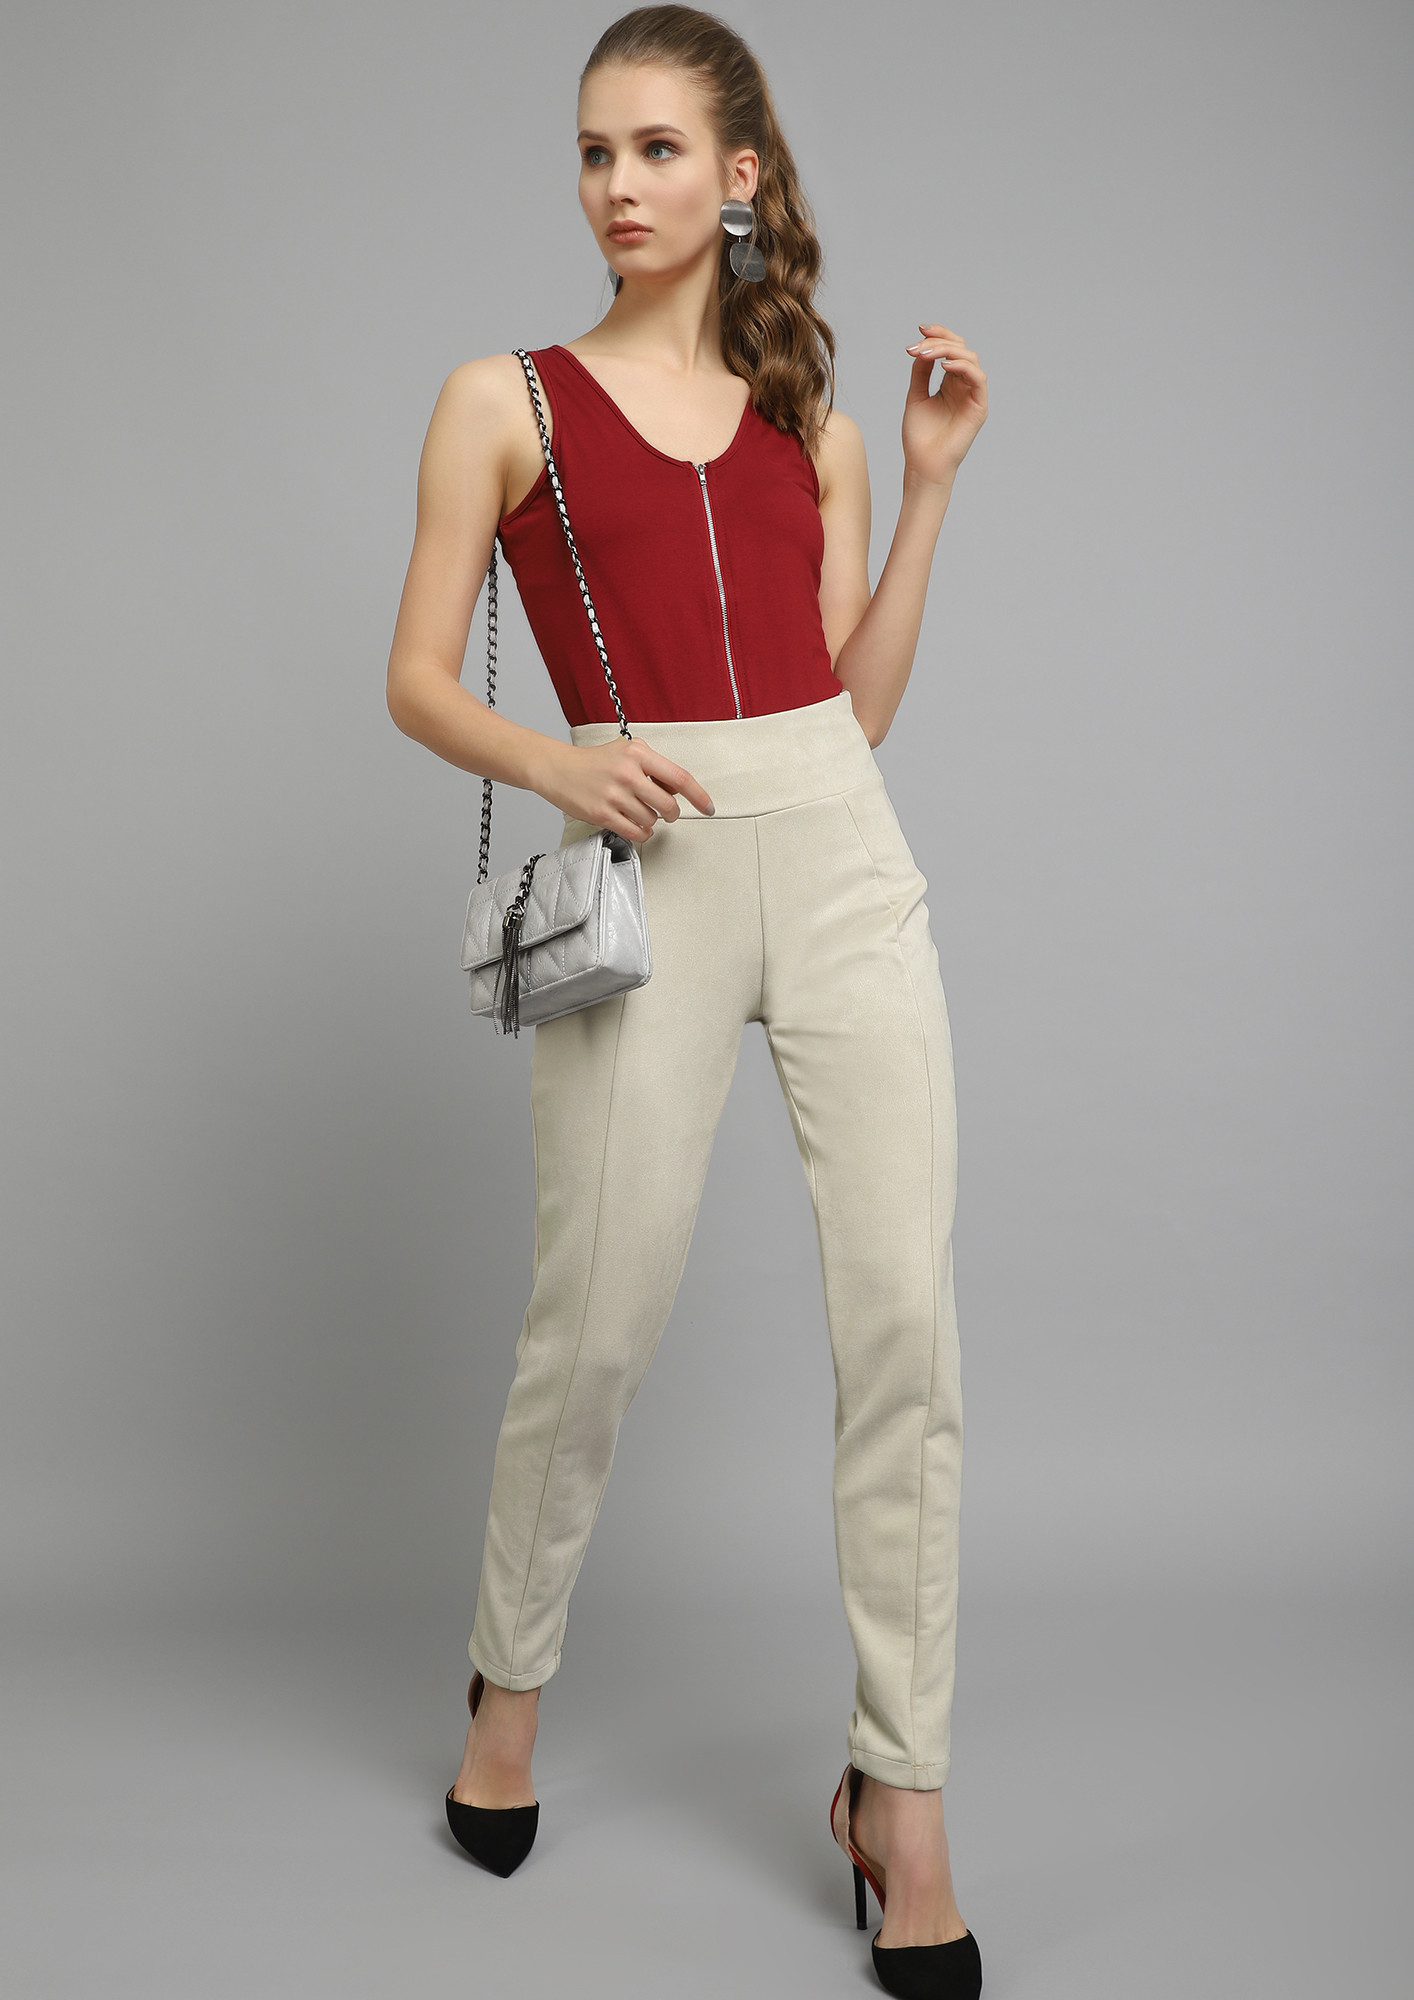 Peg Trousers - Buy Peg Trousers online in India